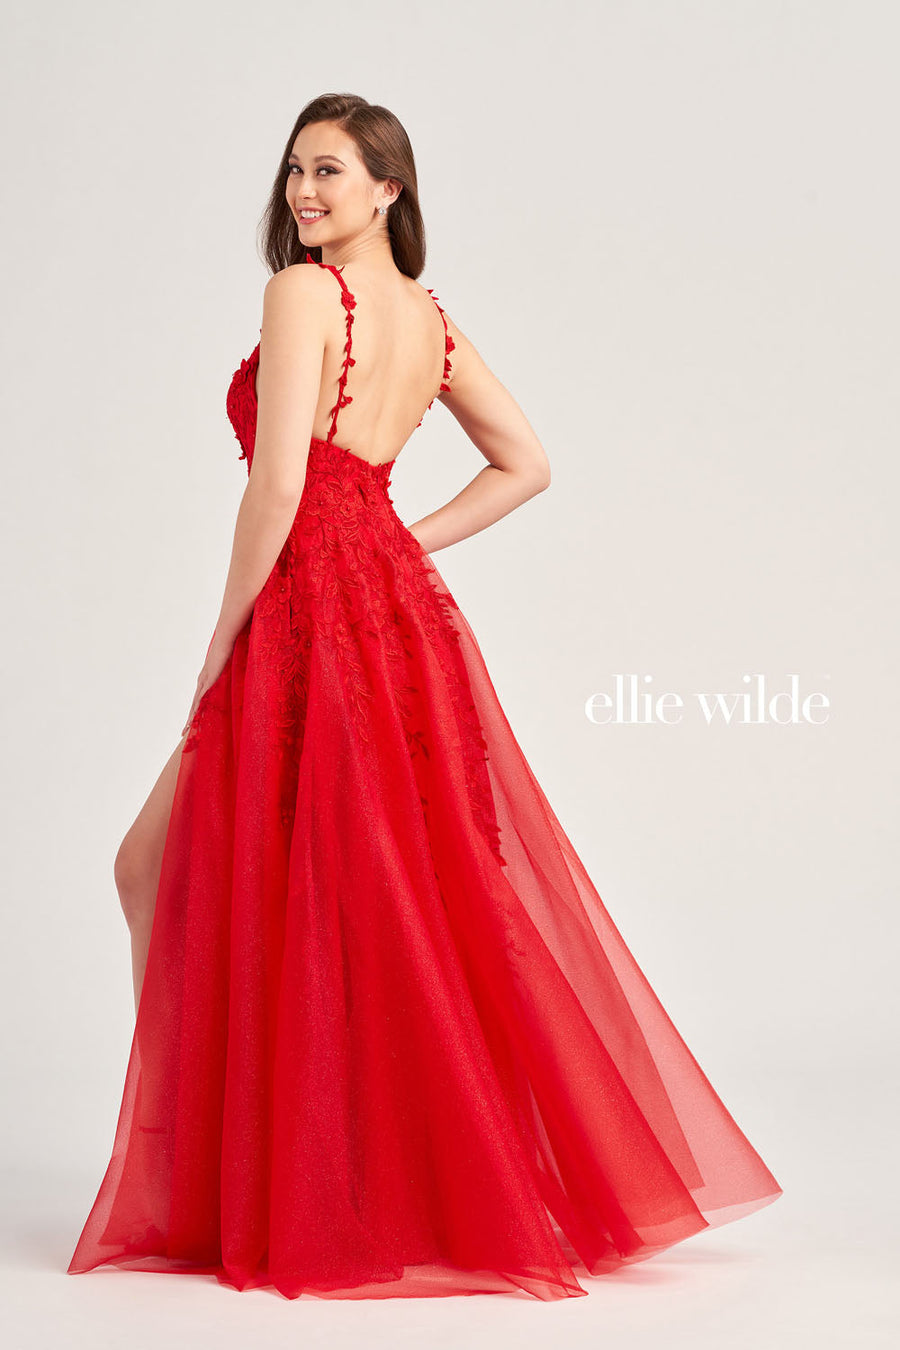 Ellie Wilde EW35233 prom dress images.  Ellie Wilde EW35233 is available in these colors: Red, Royal Blue, Light Blue, Light Yellow.